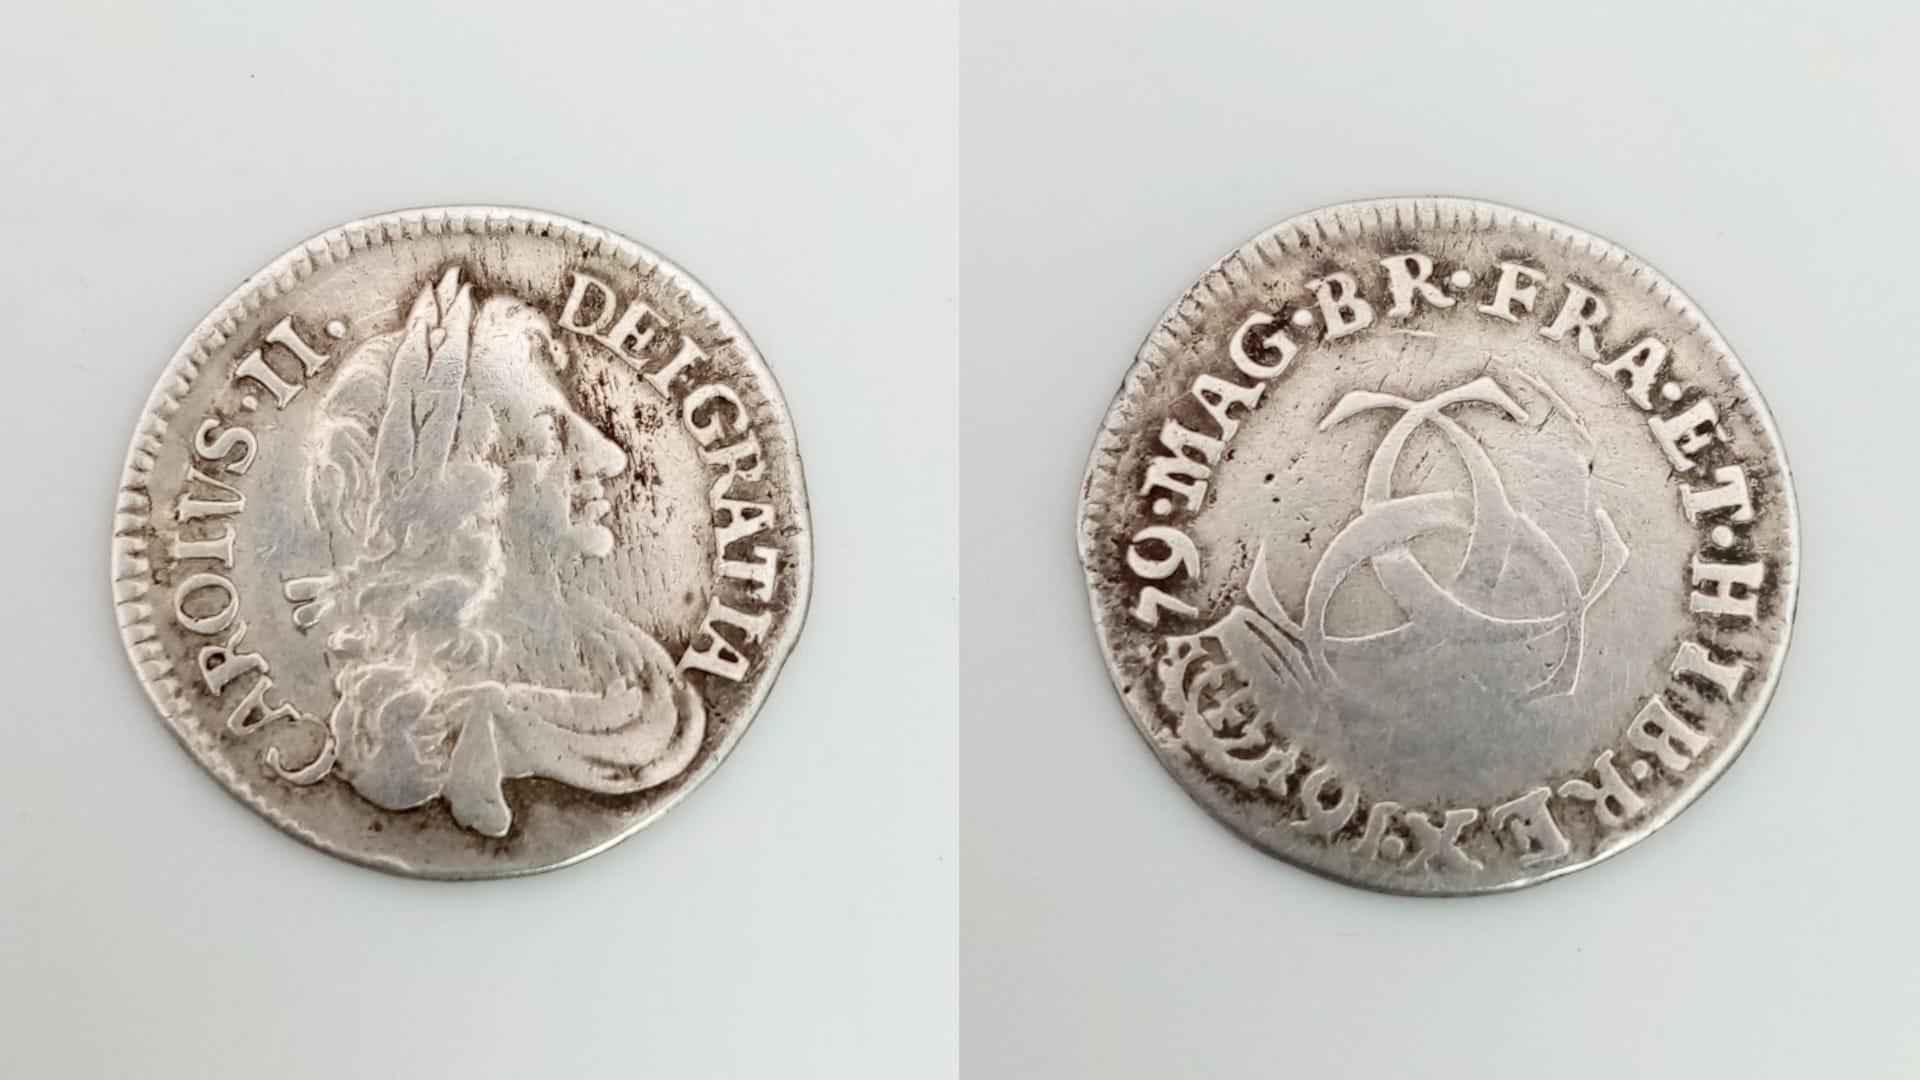 A Charles II 1679 Silver Threepence Coin. S3386. Please see photos for conditions.